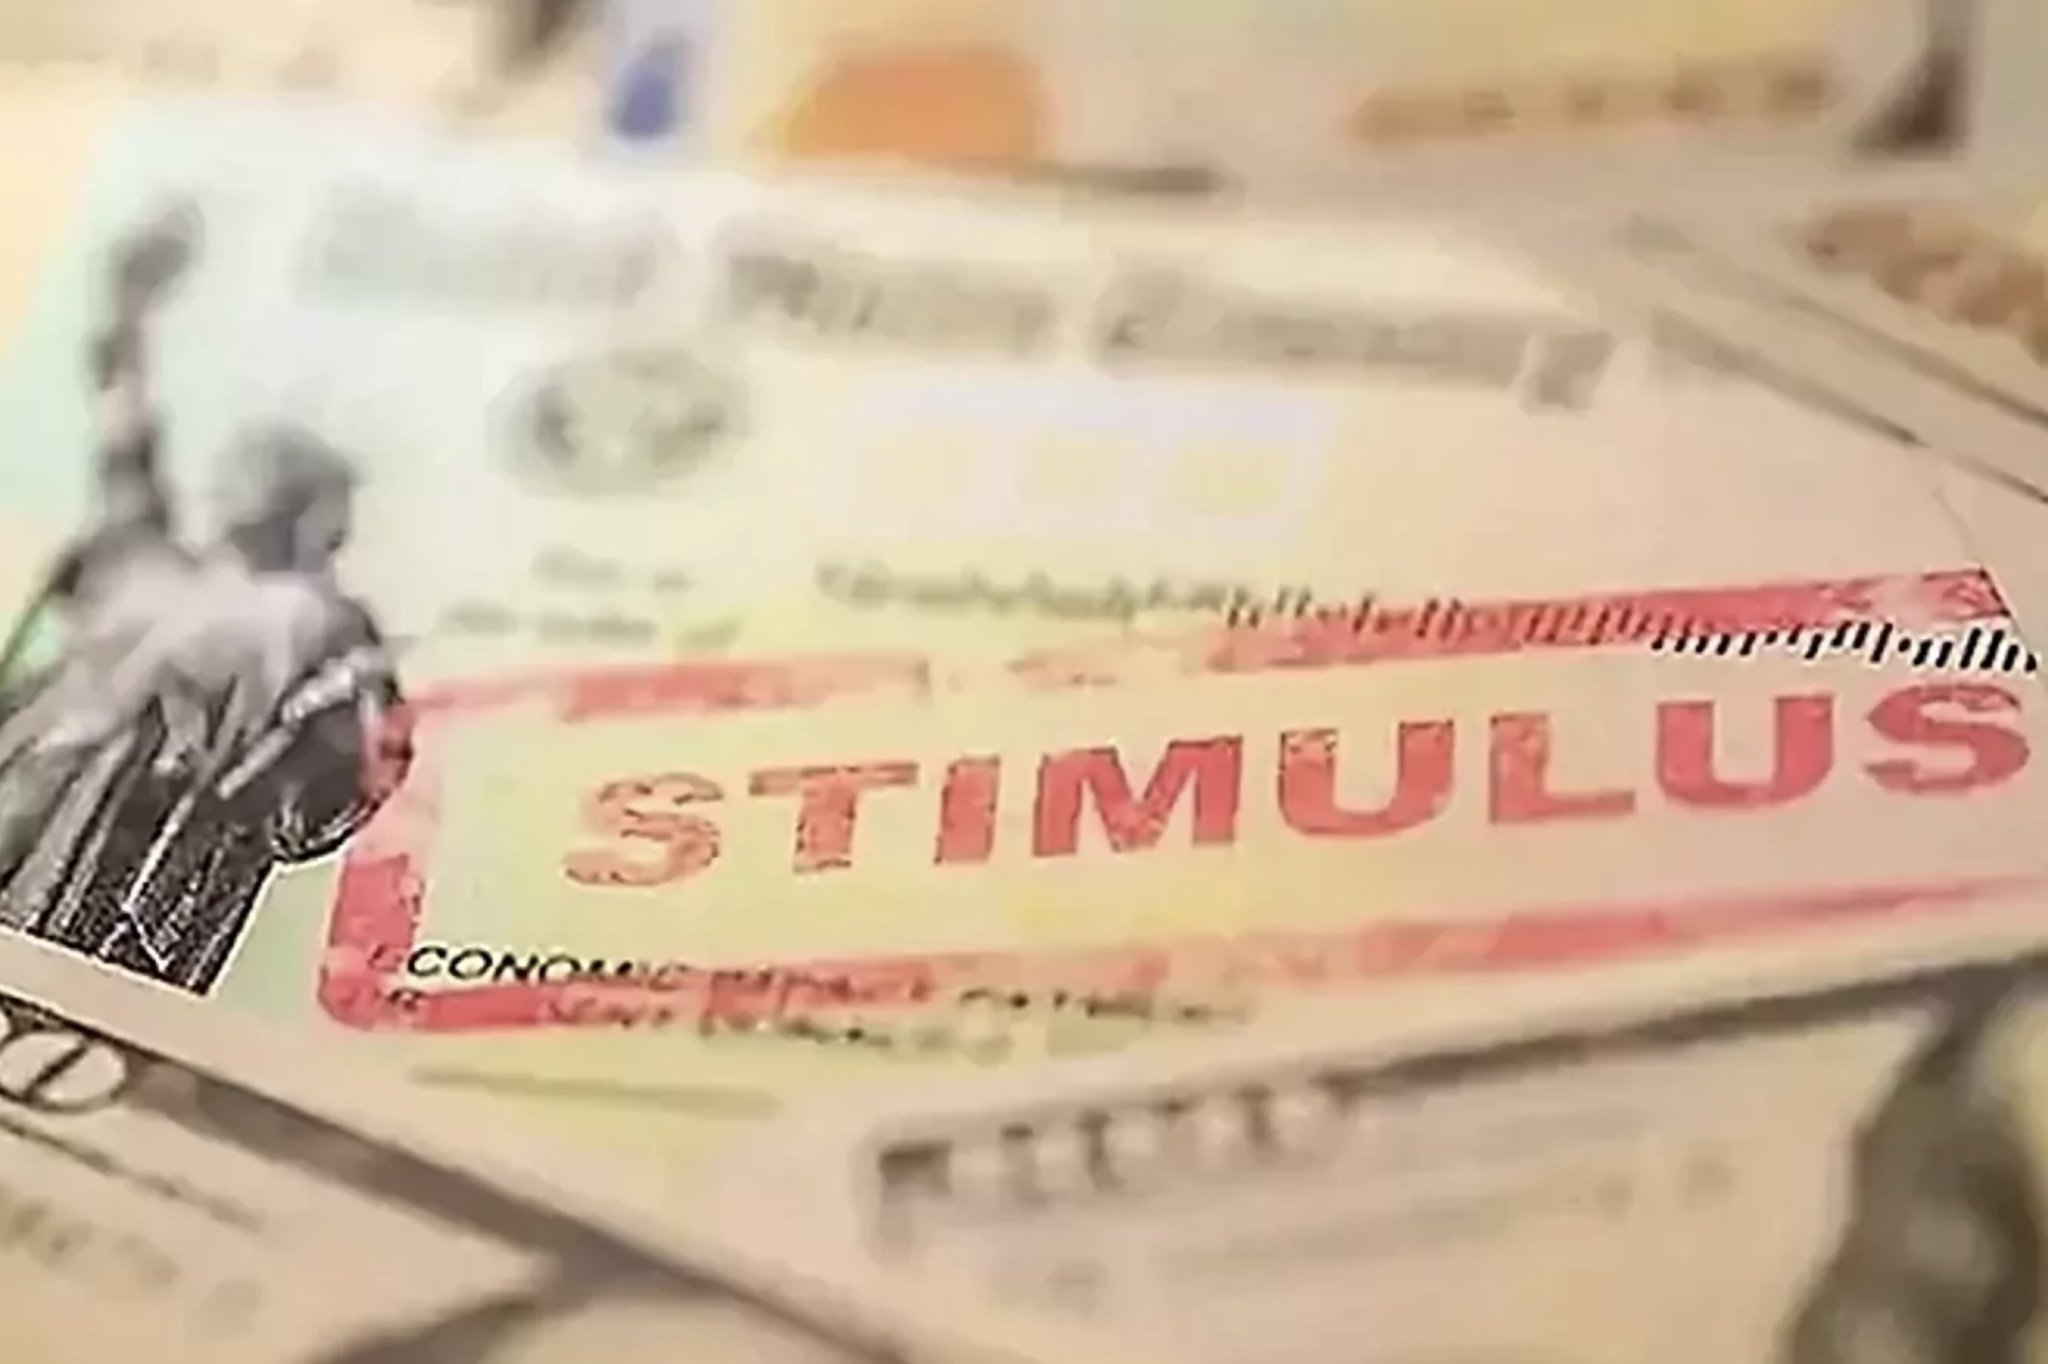 Texas Stimulus Checks: Who is eligible to receive a payment this month?